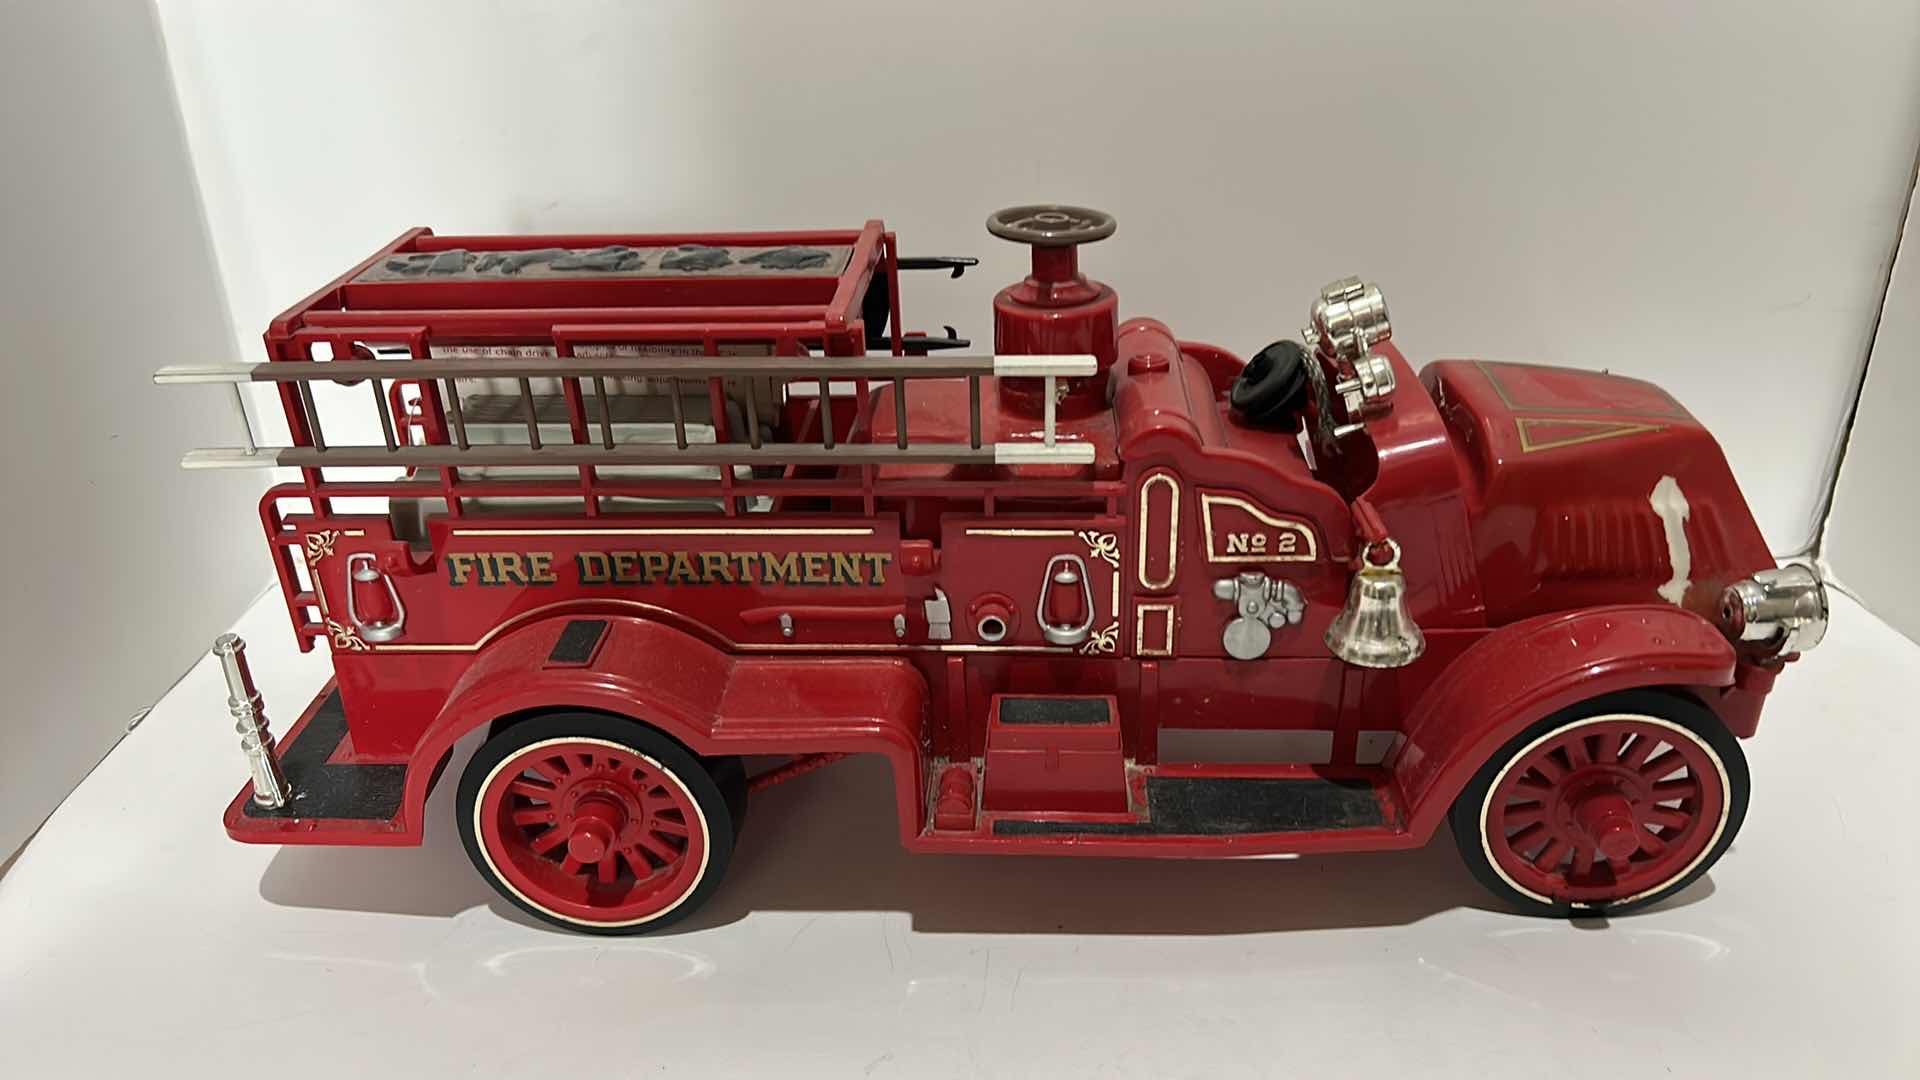 Photo 2 of COLLECTIBLE LIQUOR BOTTLES FIRE TRUCK MEASURES 17“ x 6 1/2“ x 7“